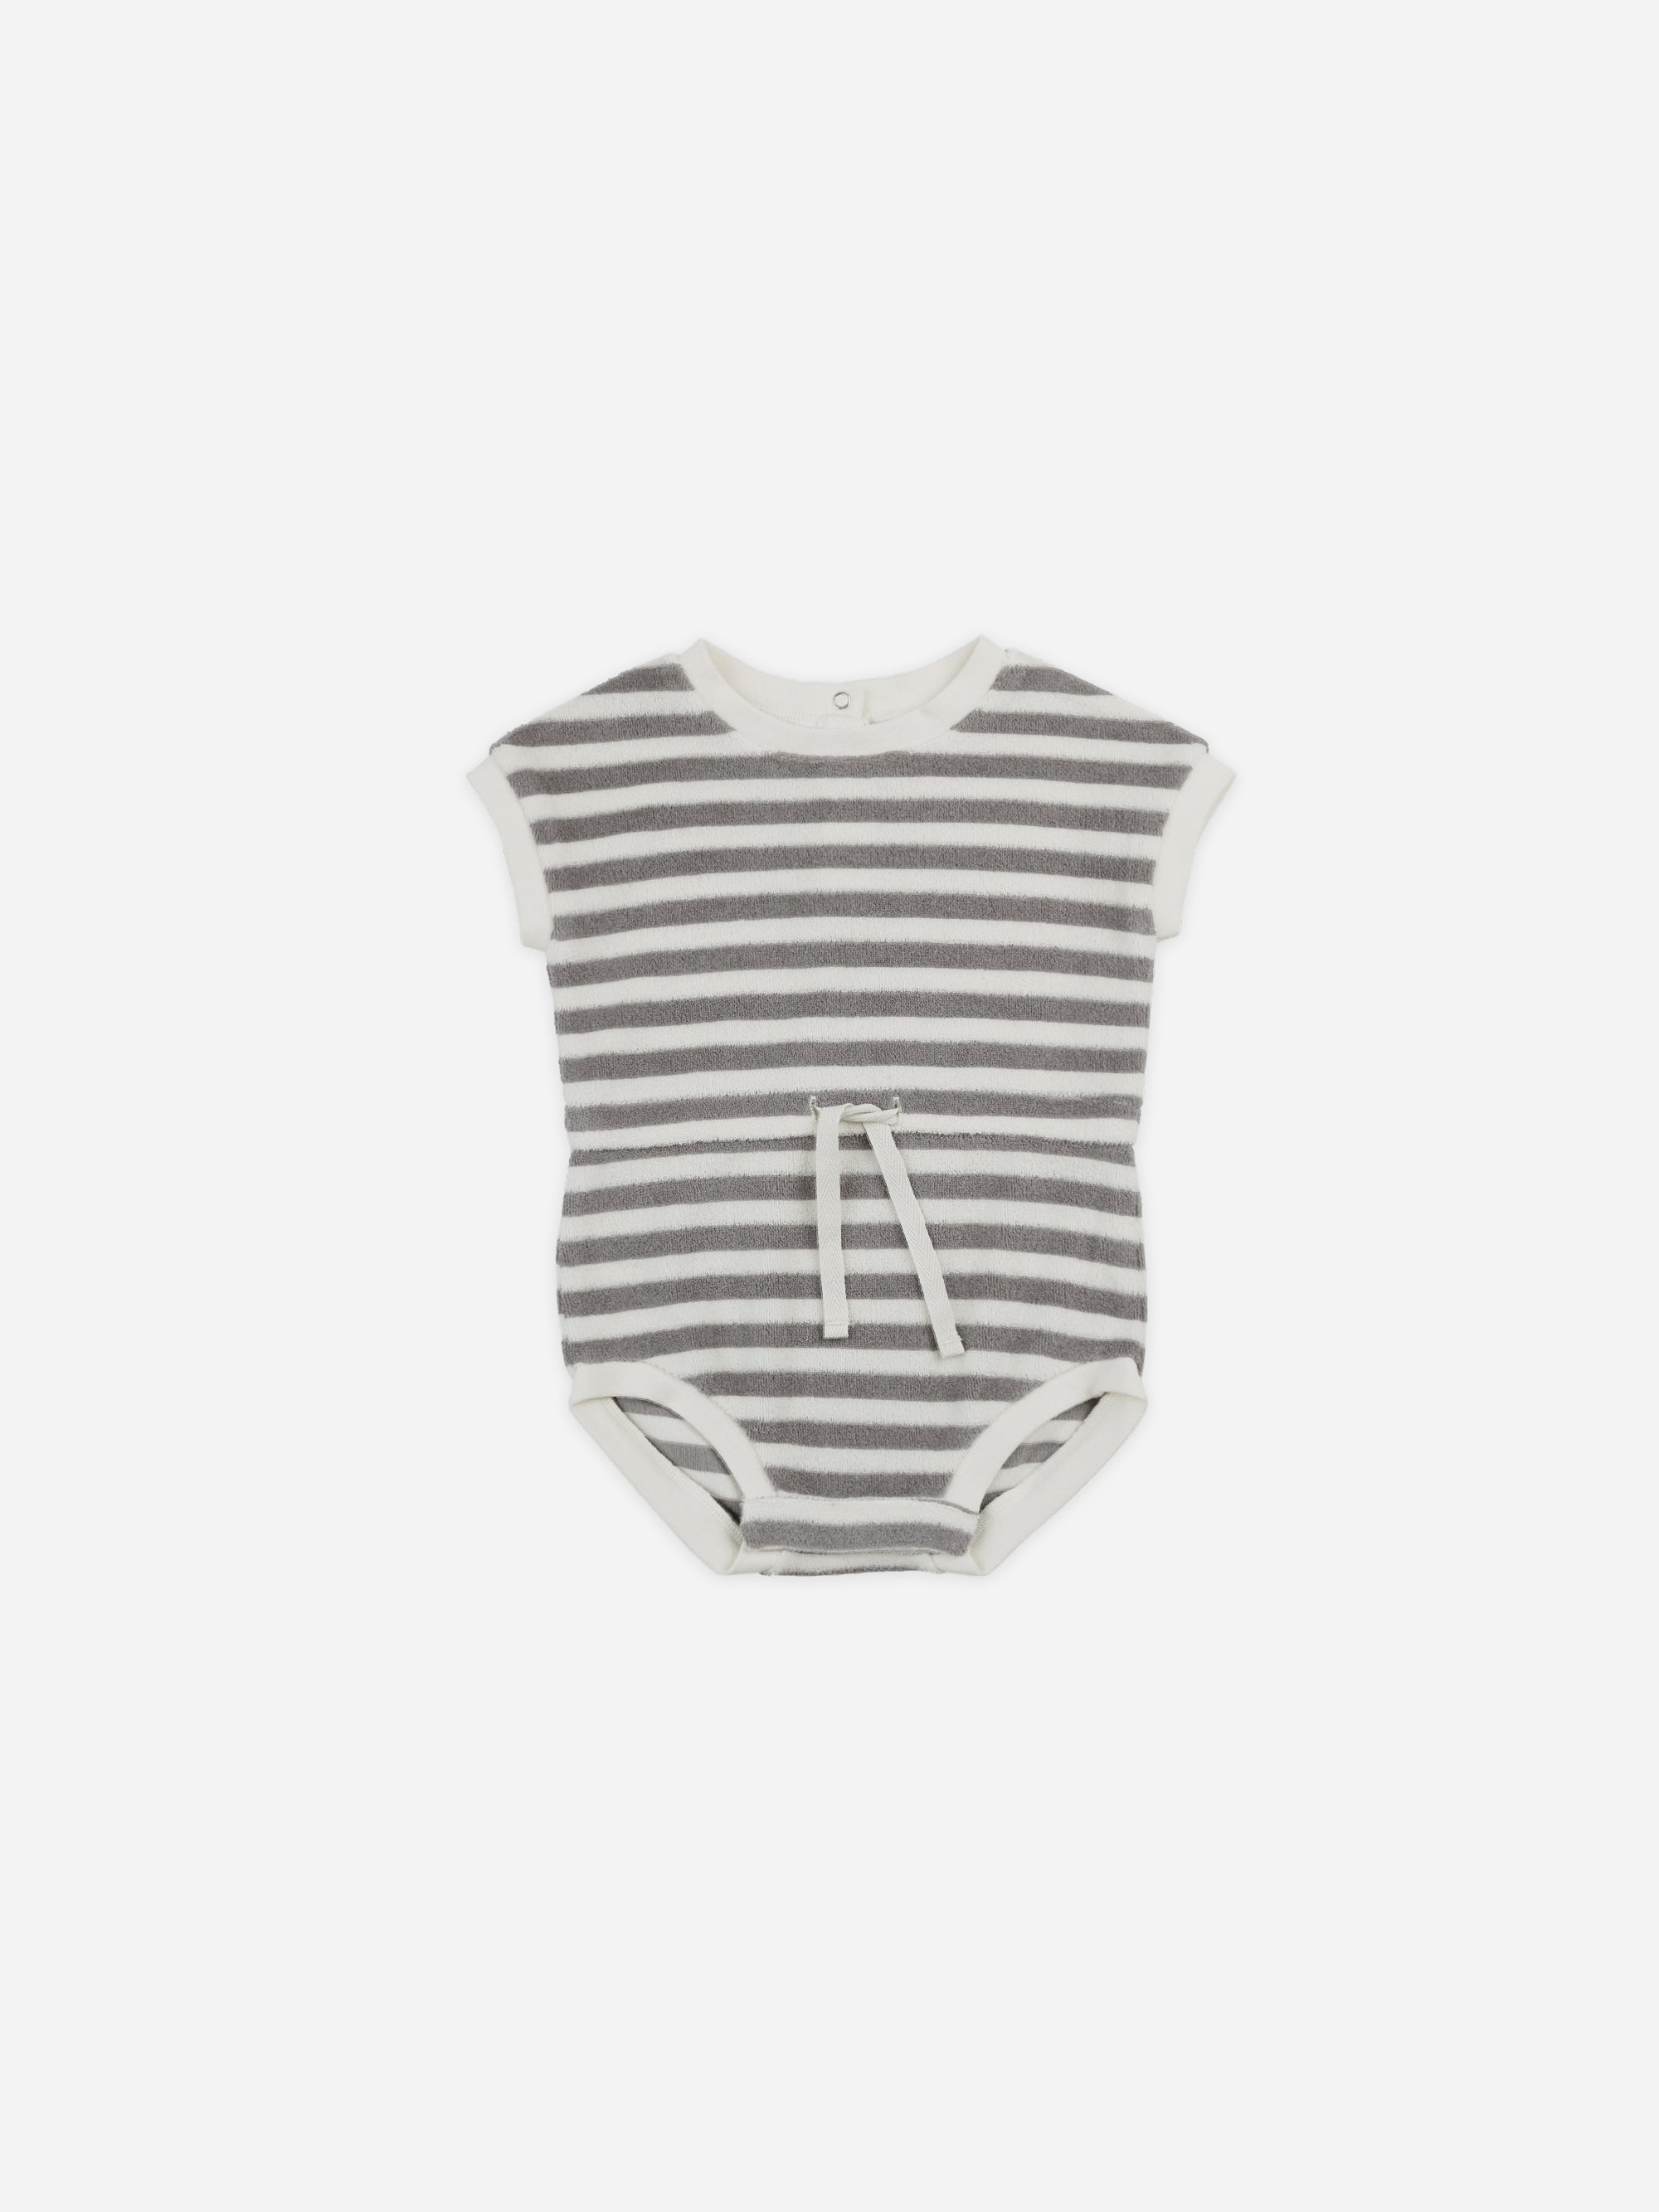 Retro Romper || Retro Stripe - Rylee + Cru | Kids Clothes | Trendy Baby Clothes | Modern Infant Outfits |